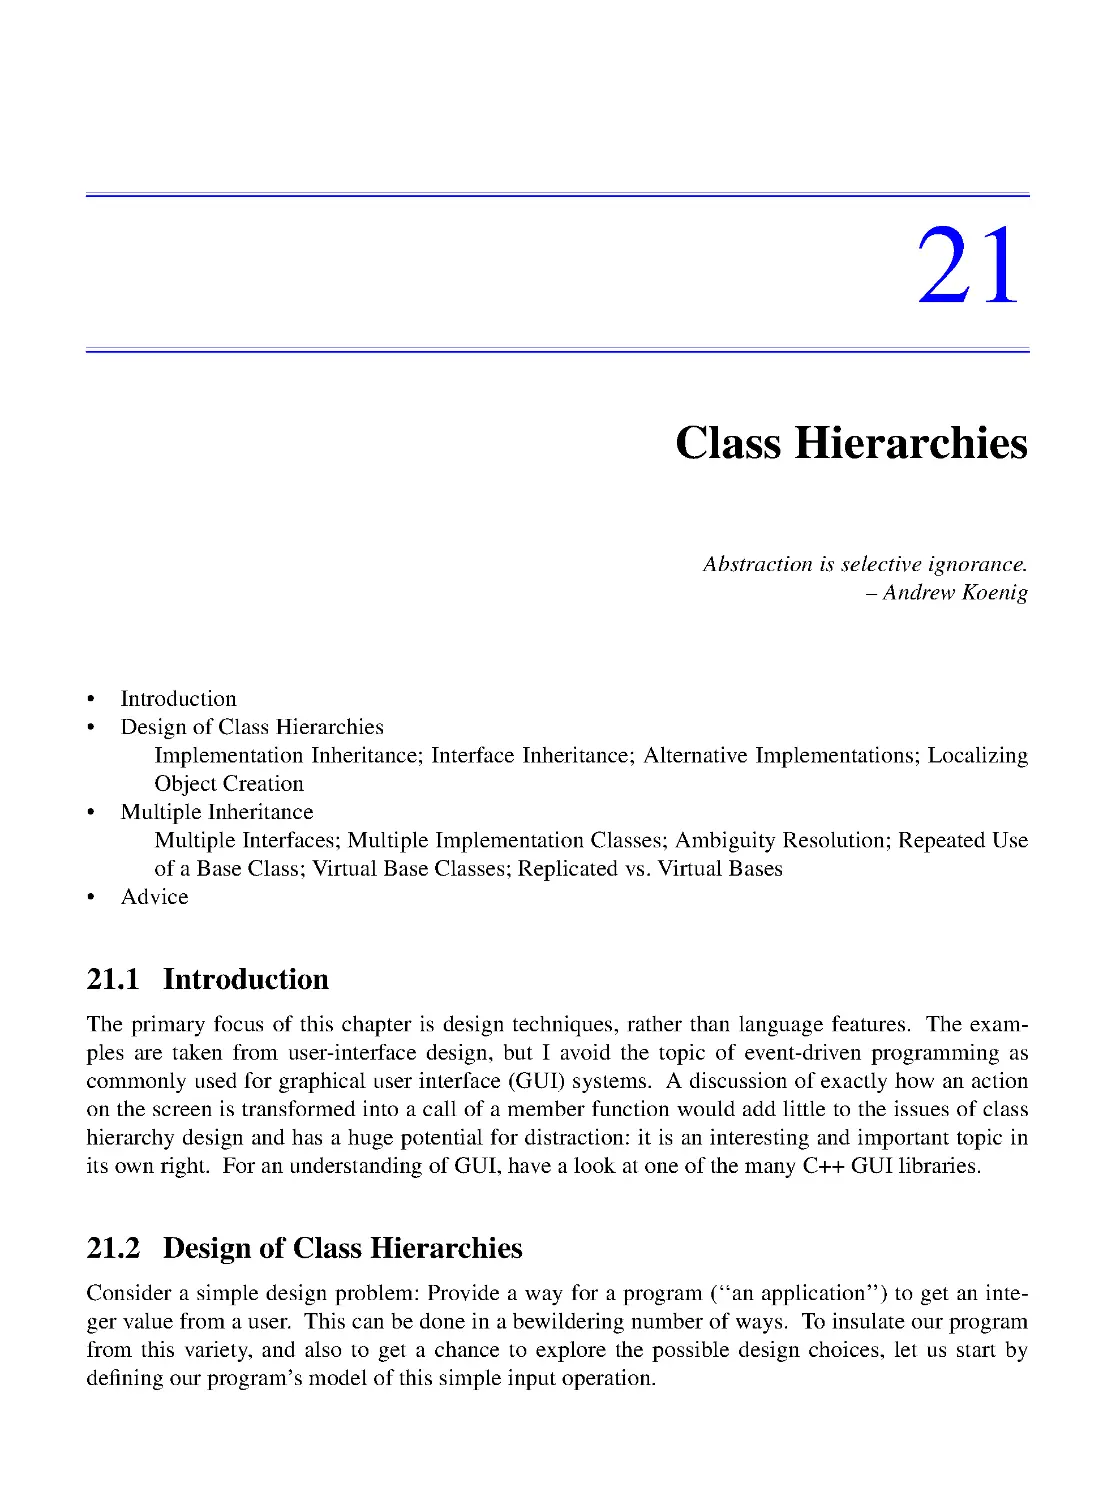 21. Class Hierarchies